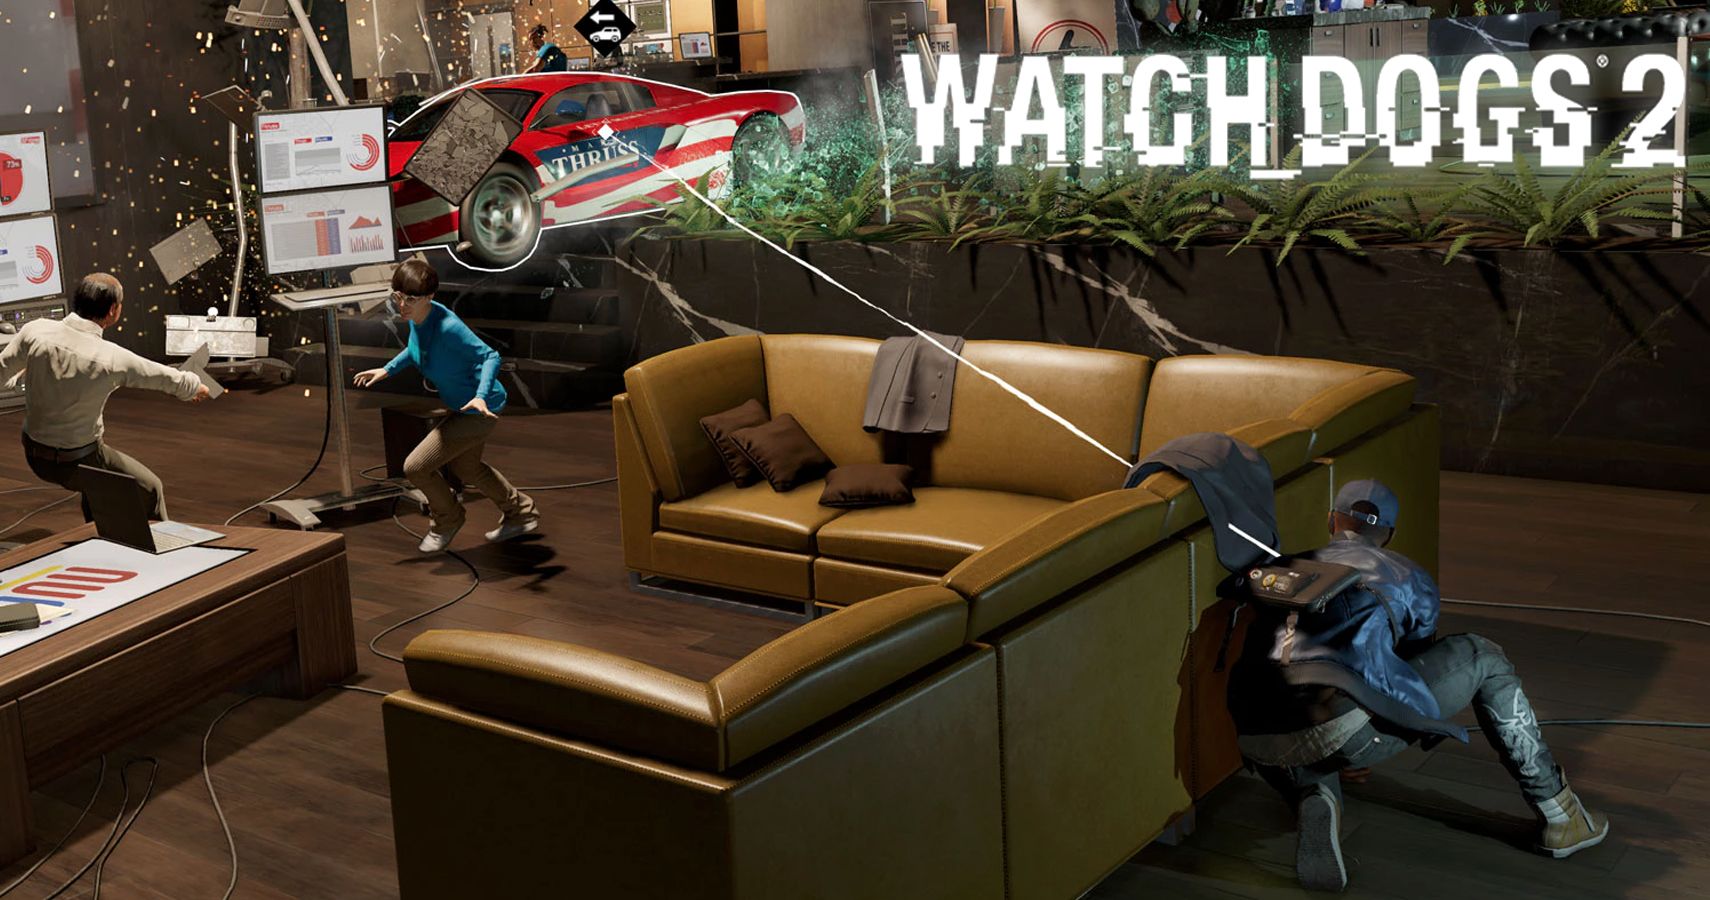 watch dogs 2 tv tropes